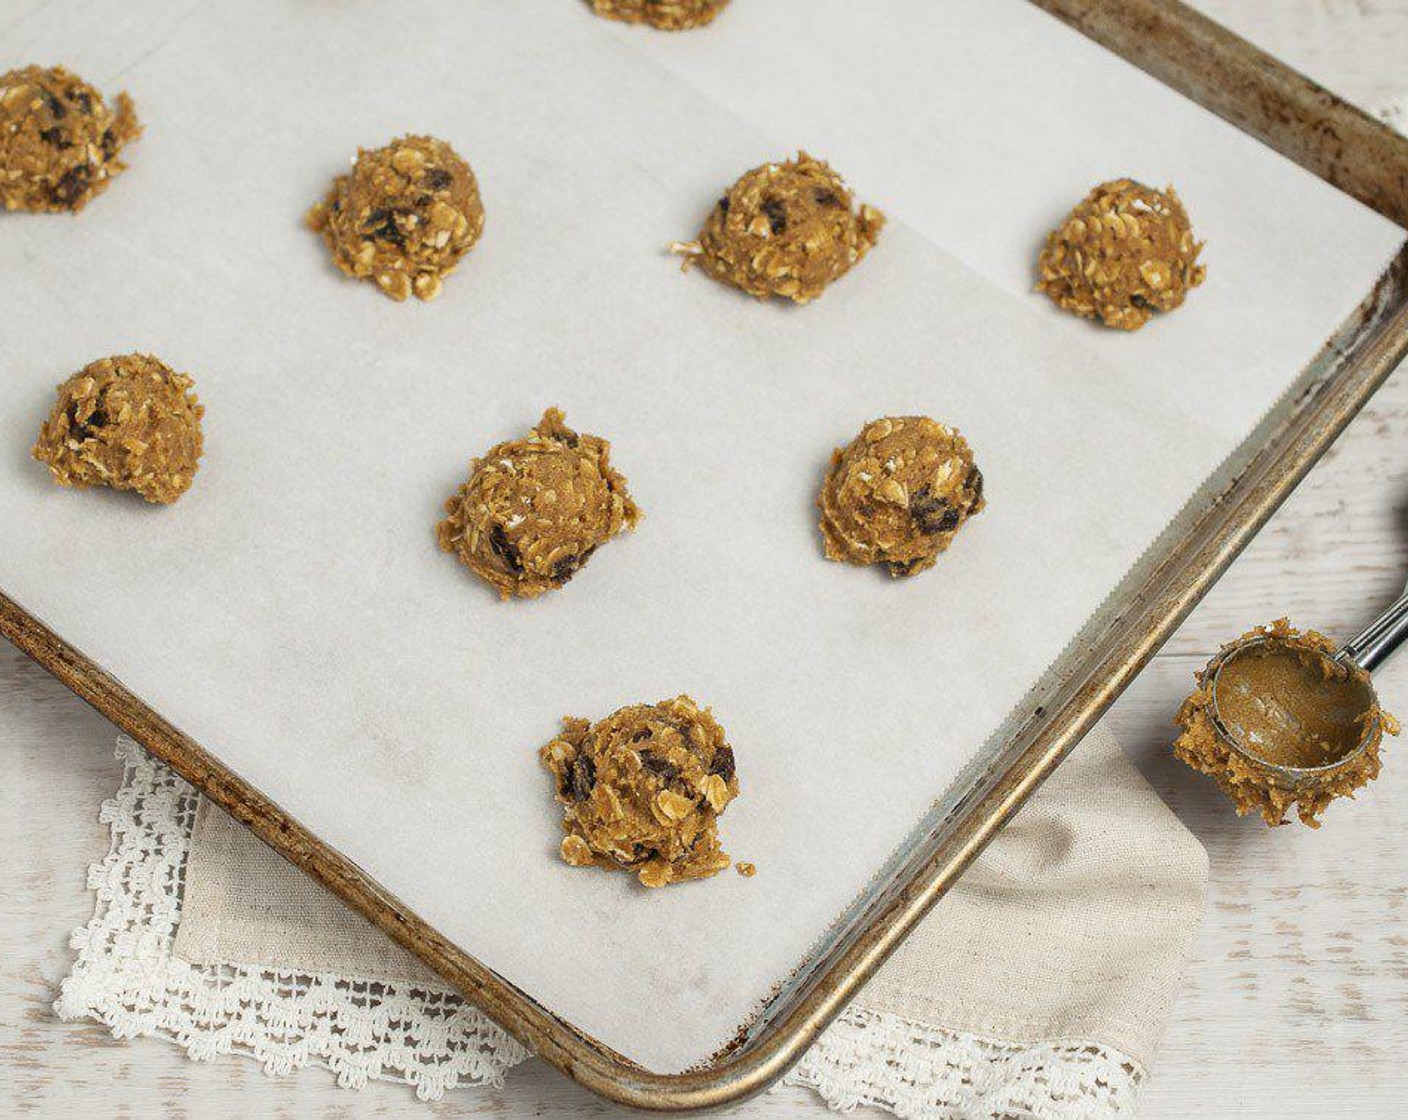 step 6 Using a one-ounce cookie scoop or tablespoon, drop dough onto parchment lined baking trays, spacing 2" apart. Flatten each cookie slightly with damp fingers or palm of your hand. Bake on middle rack for 8-10 minutes.